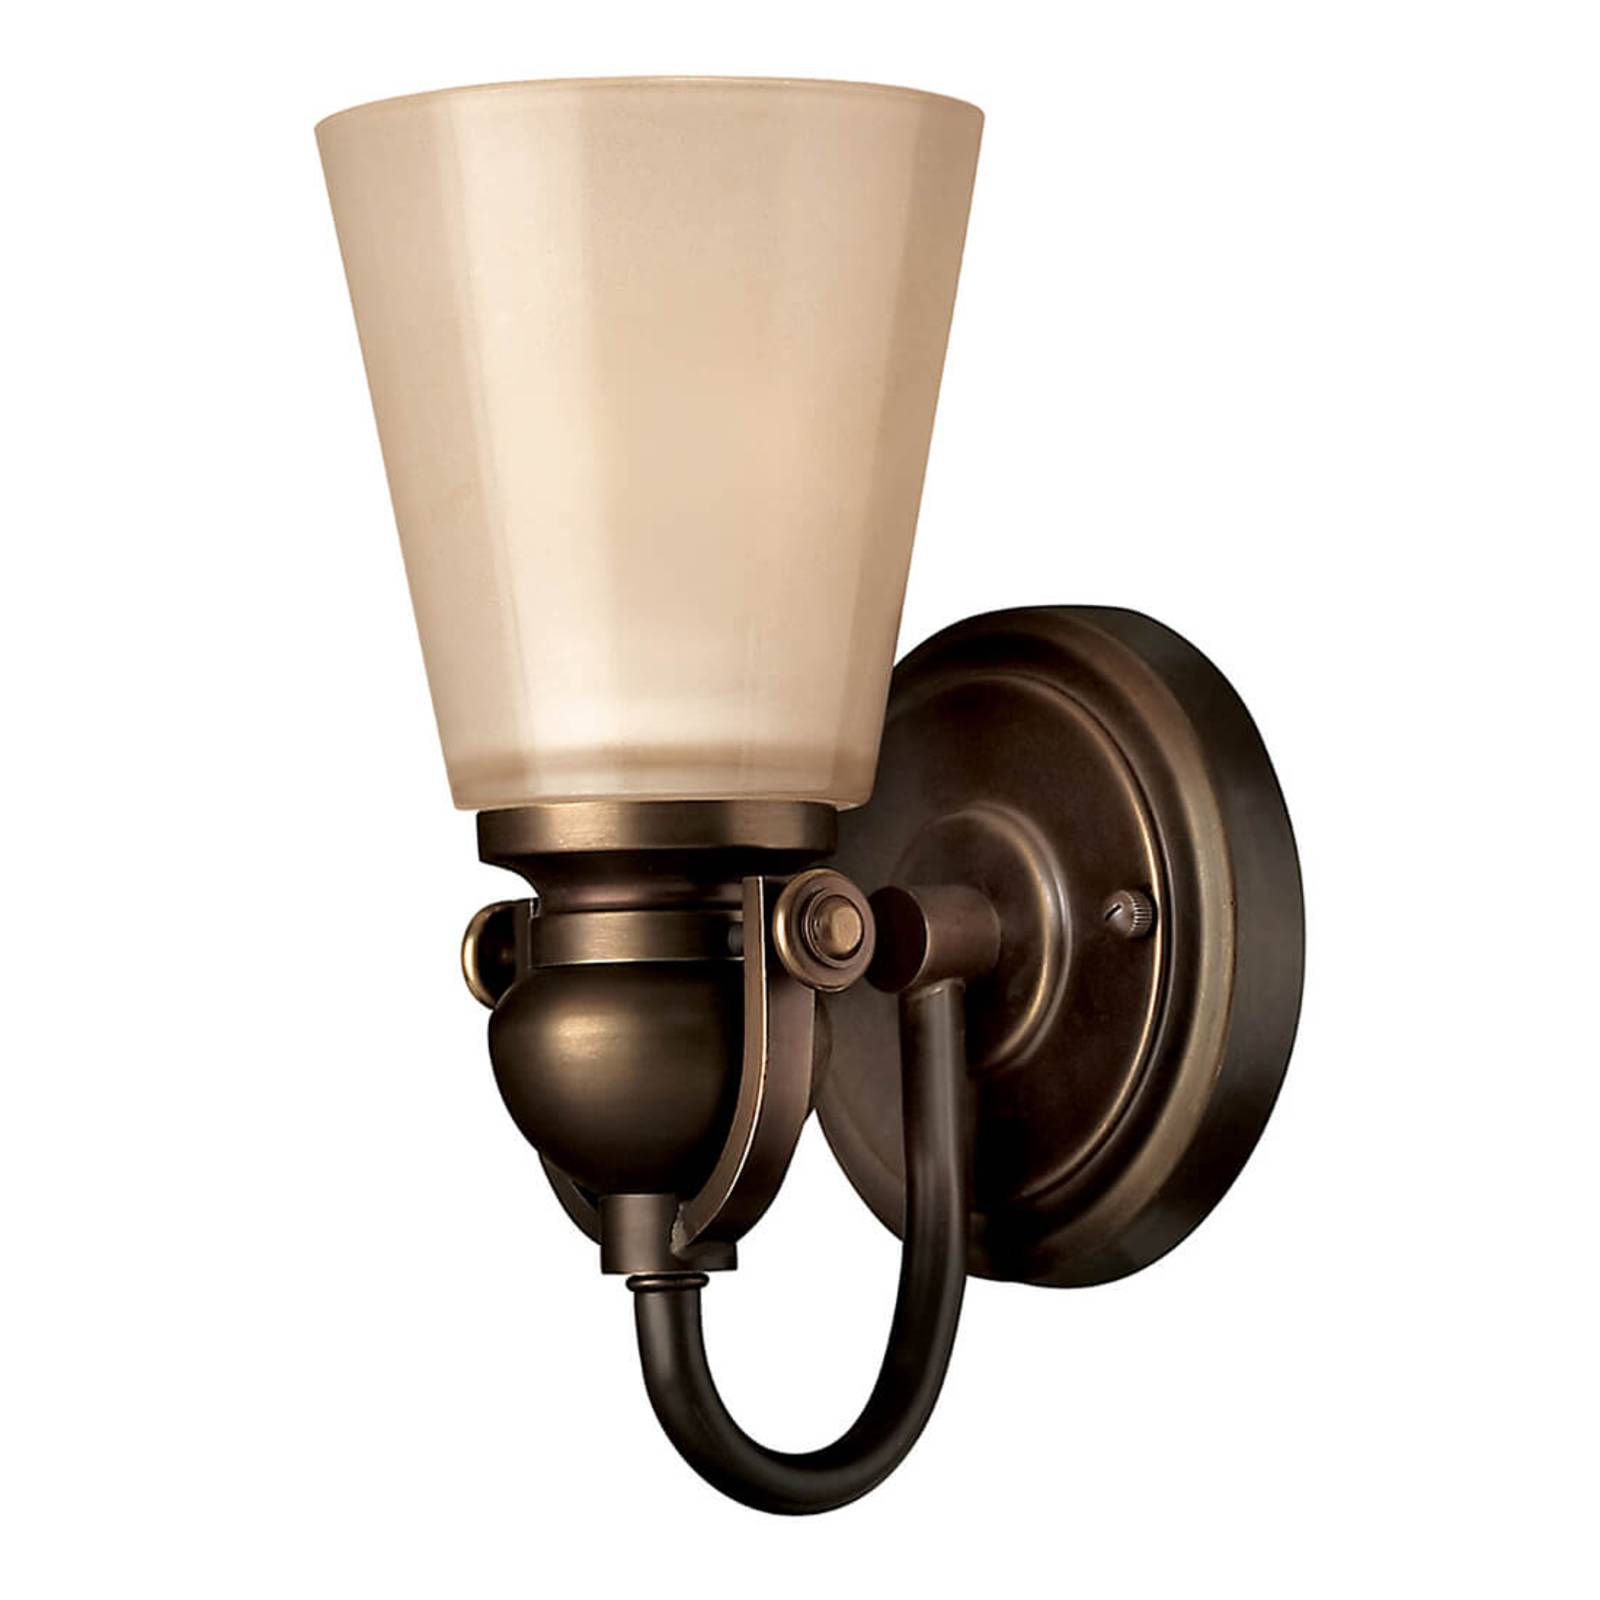 Photos - Chandelier / Lamp Hinkley Traditional wall light Mayflower 